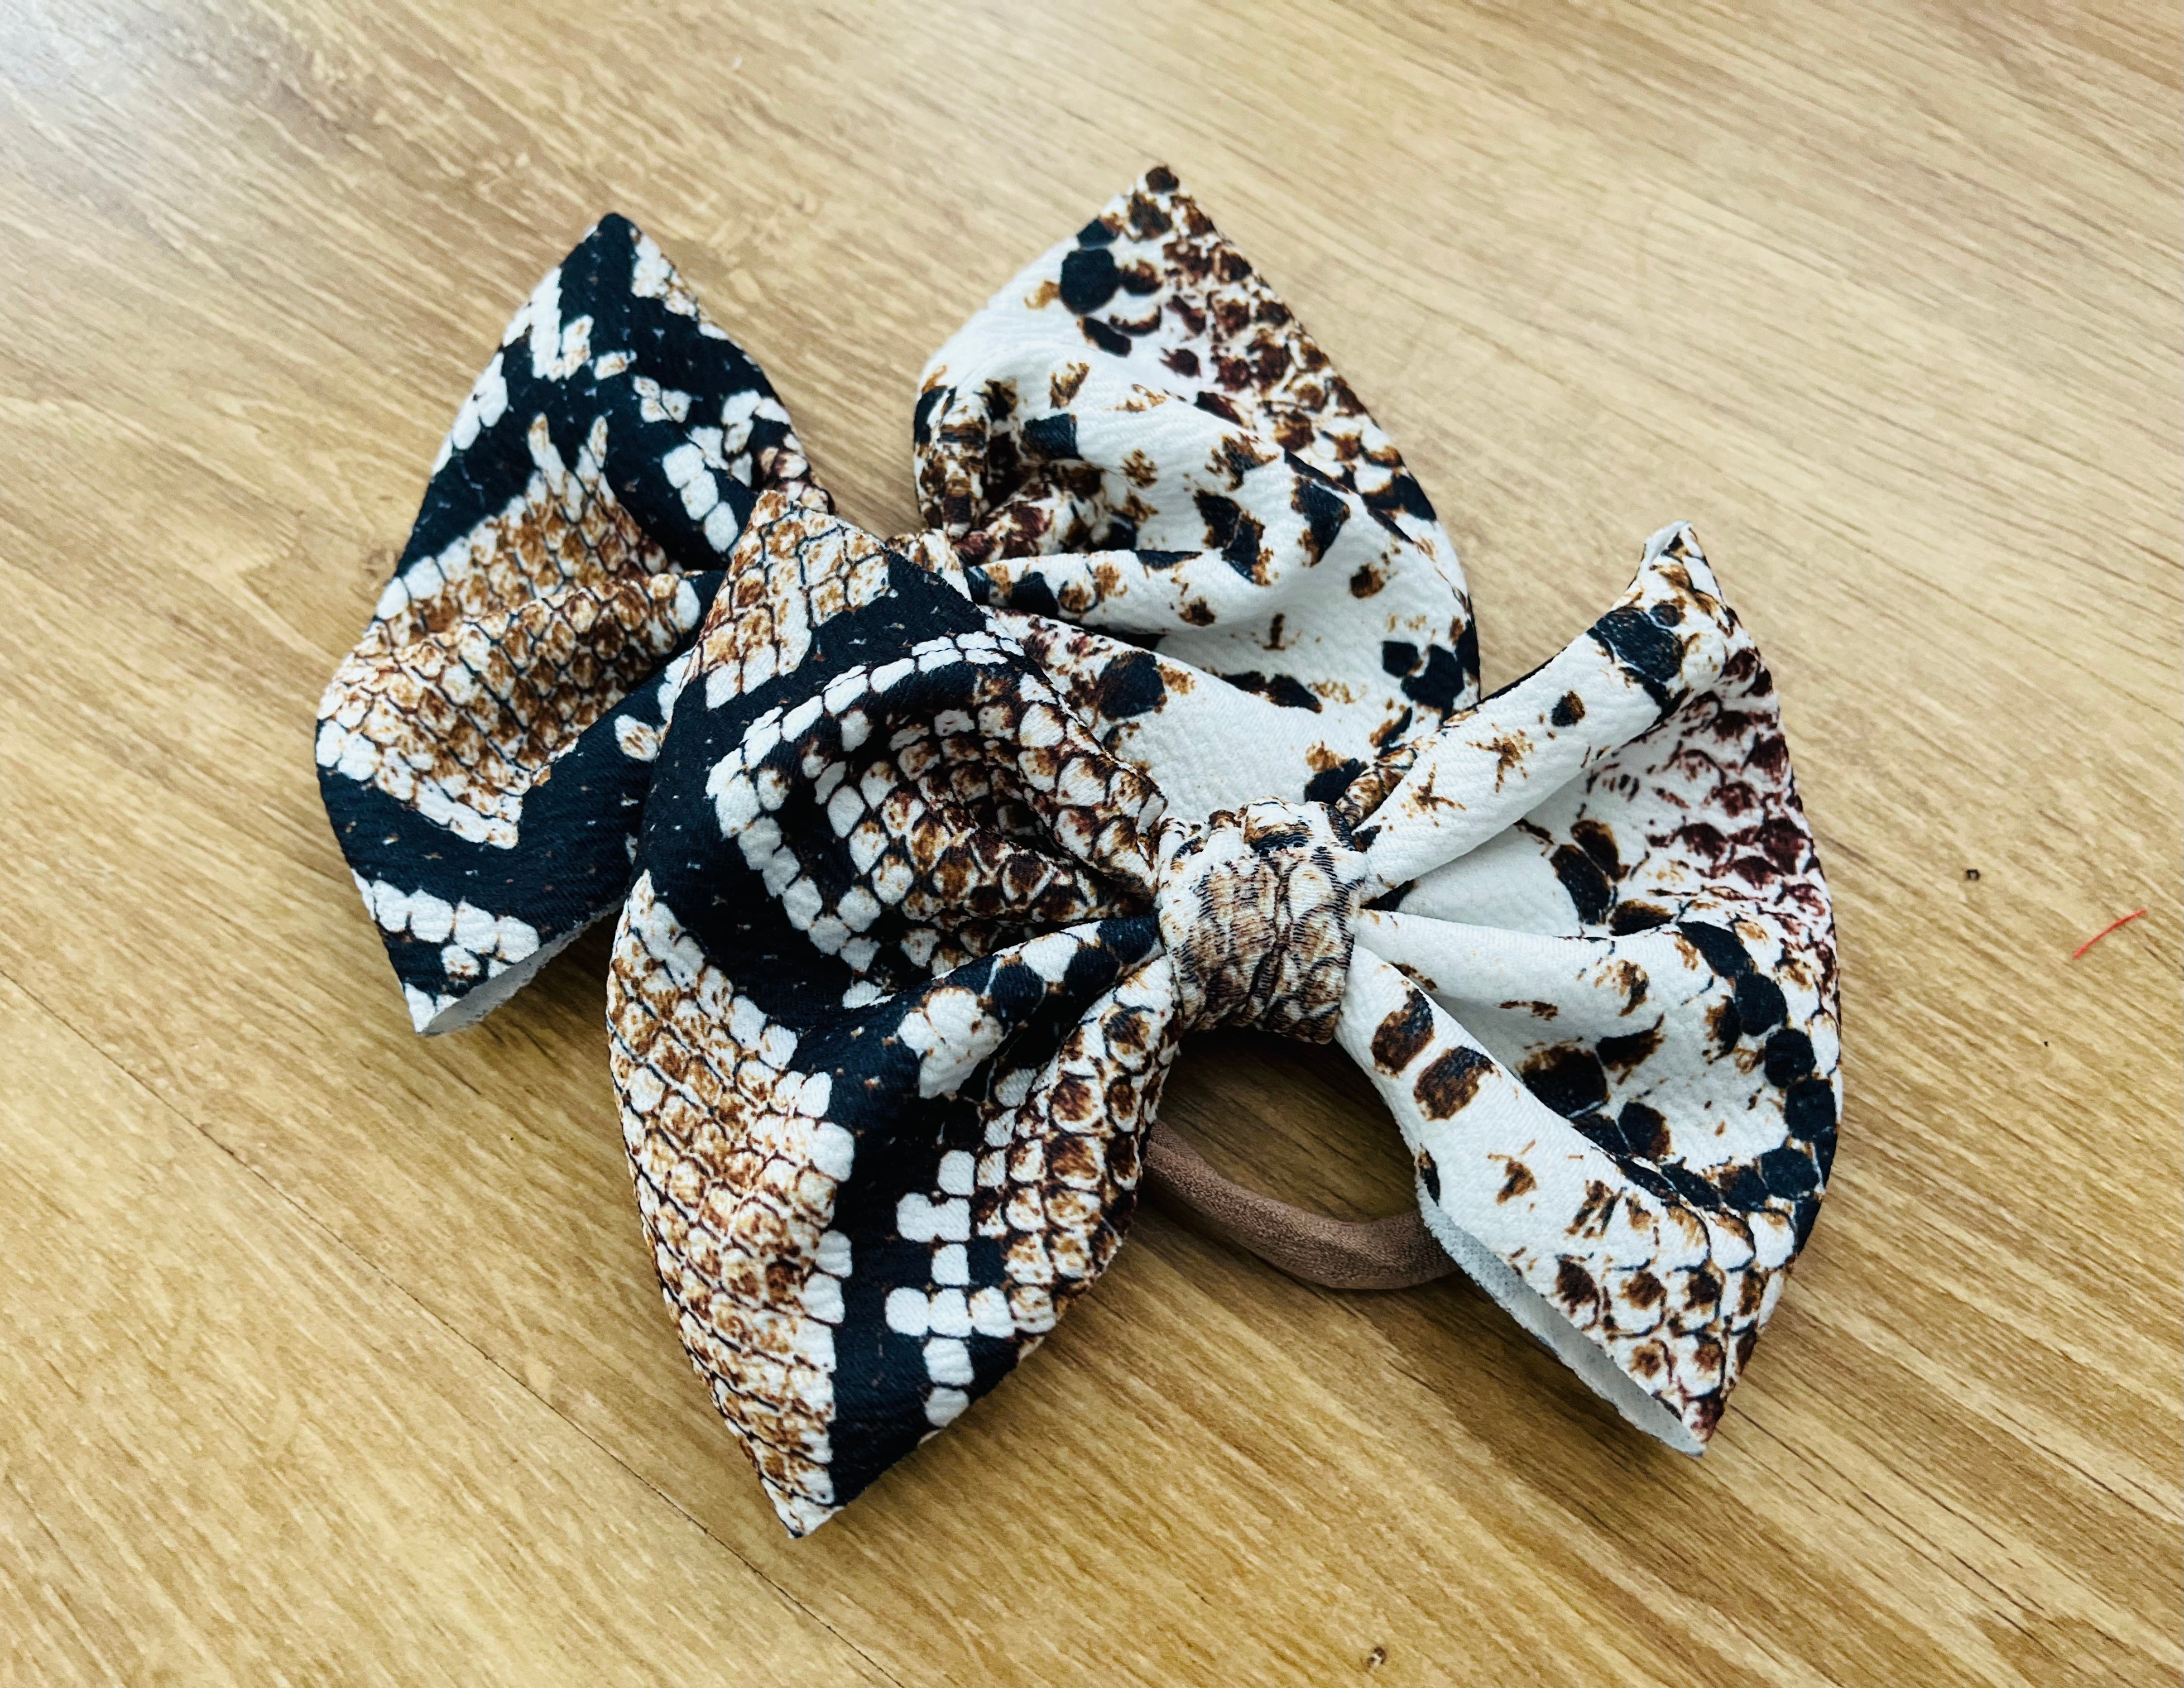 Small FunkyBows